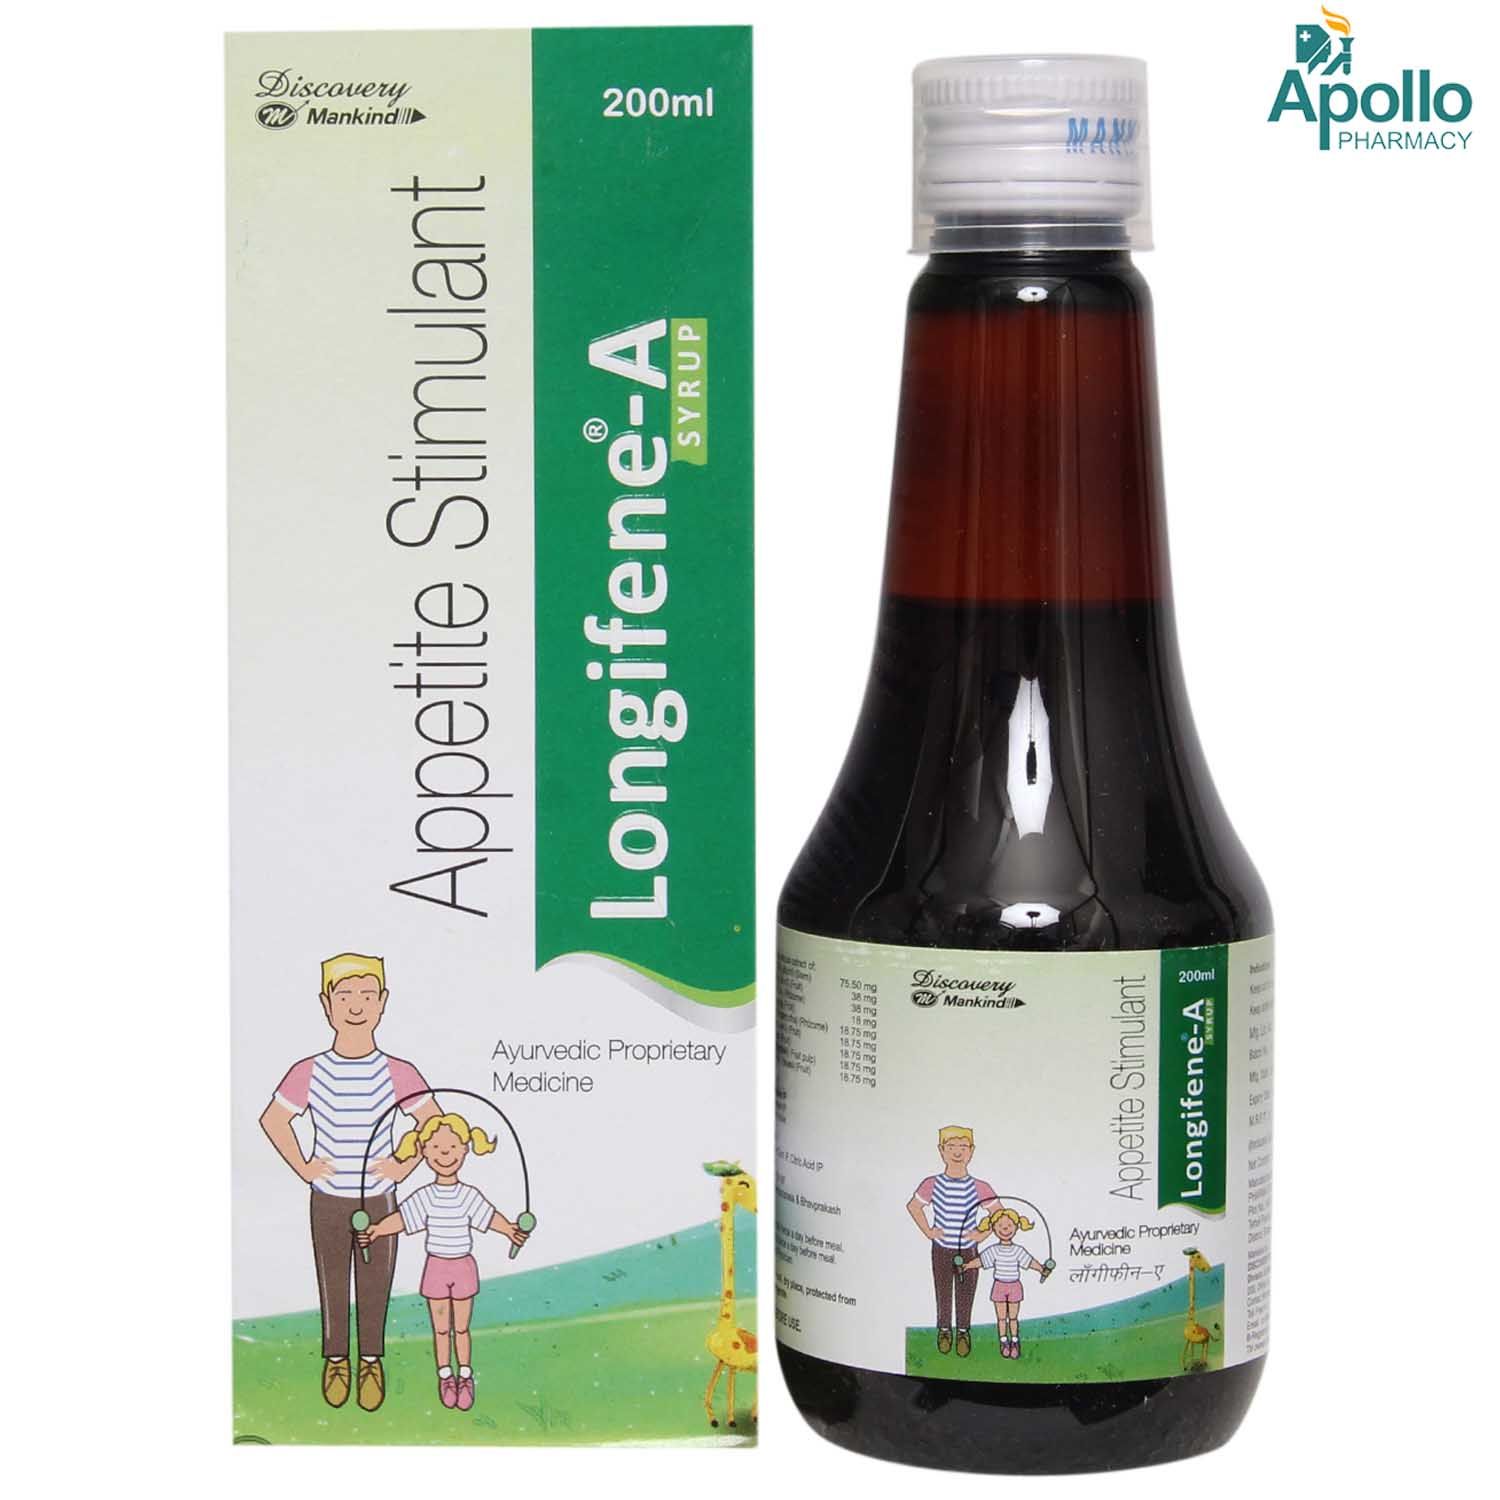 Longifene-A Syrup 200 ml, Pack of 1 SYRUP